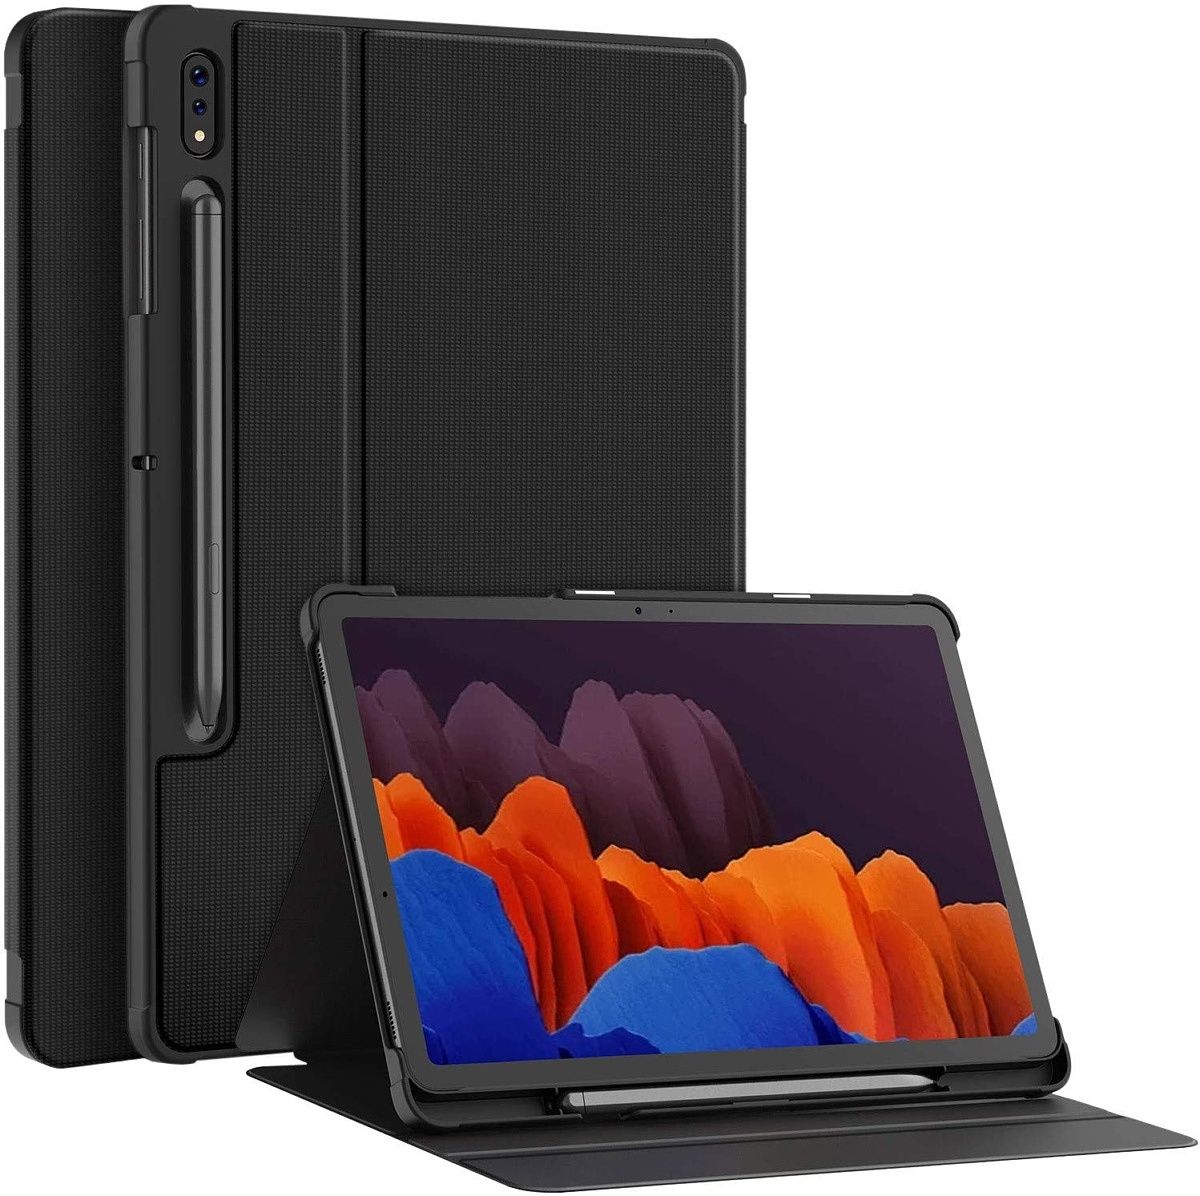 This is a premium looking folio case that covers the screen when closed. It can also act as a kickstand and has an S Pen holder built-in.